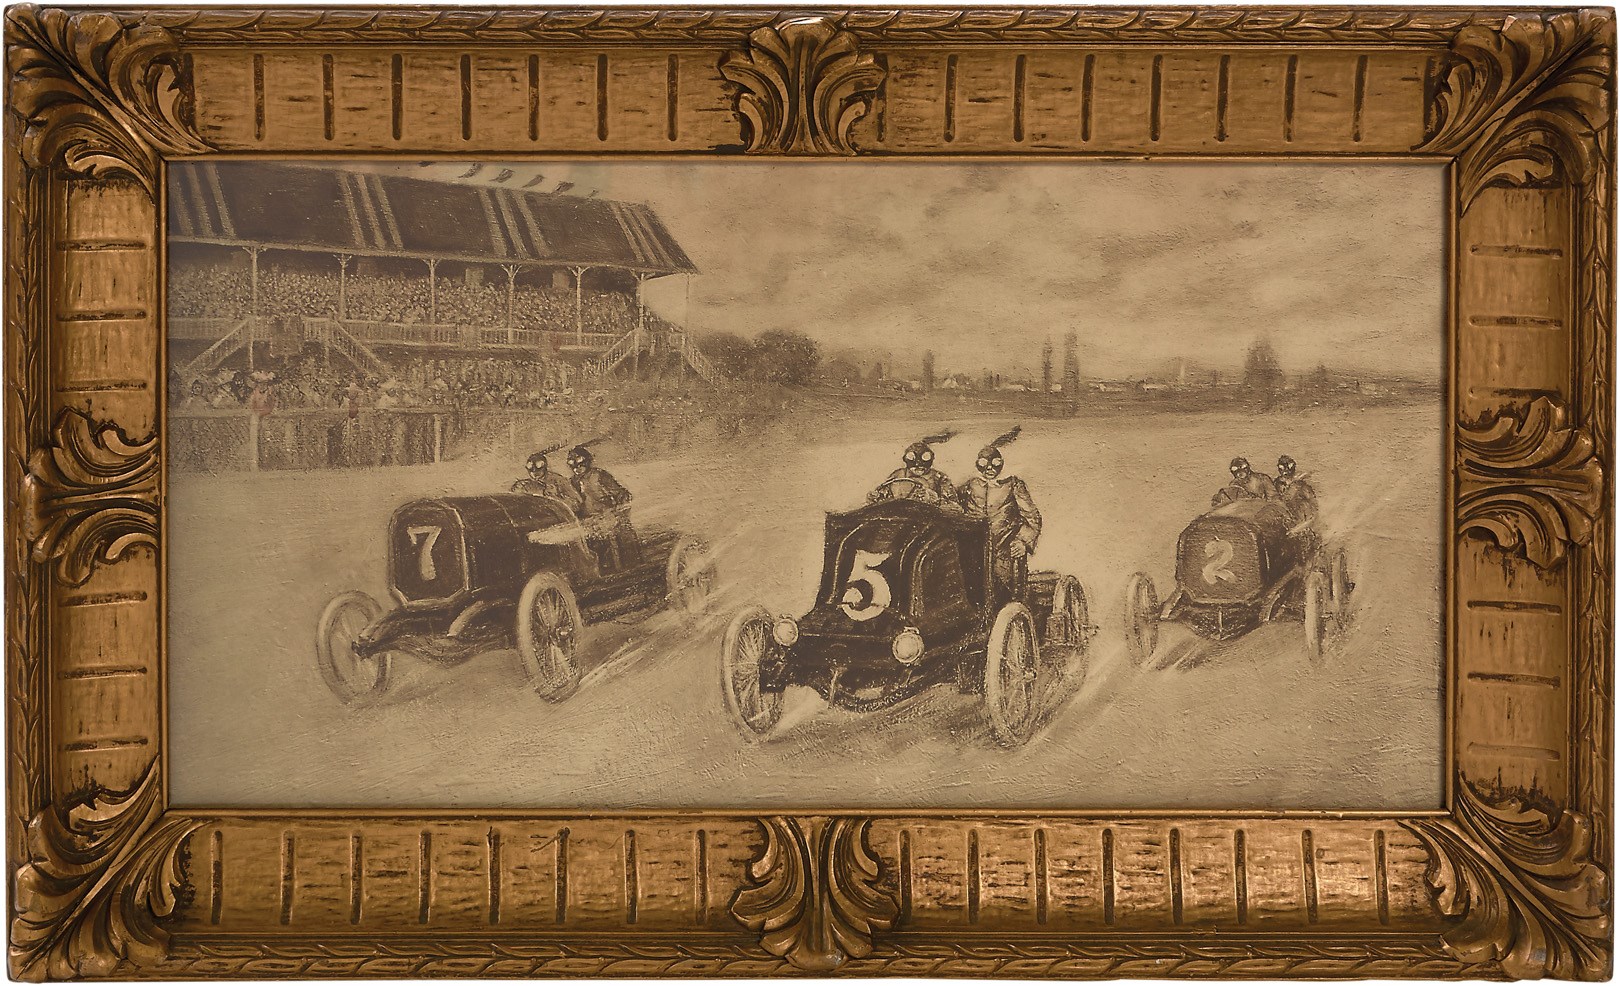 Olympics and All Sports - Circa 1911 Auto Racing Print in Original Gold Leaf Frame